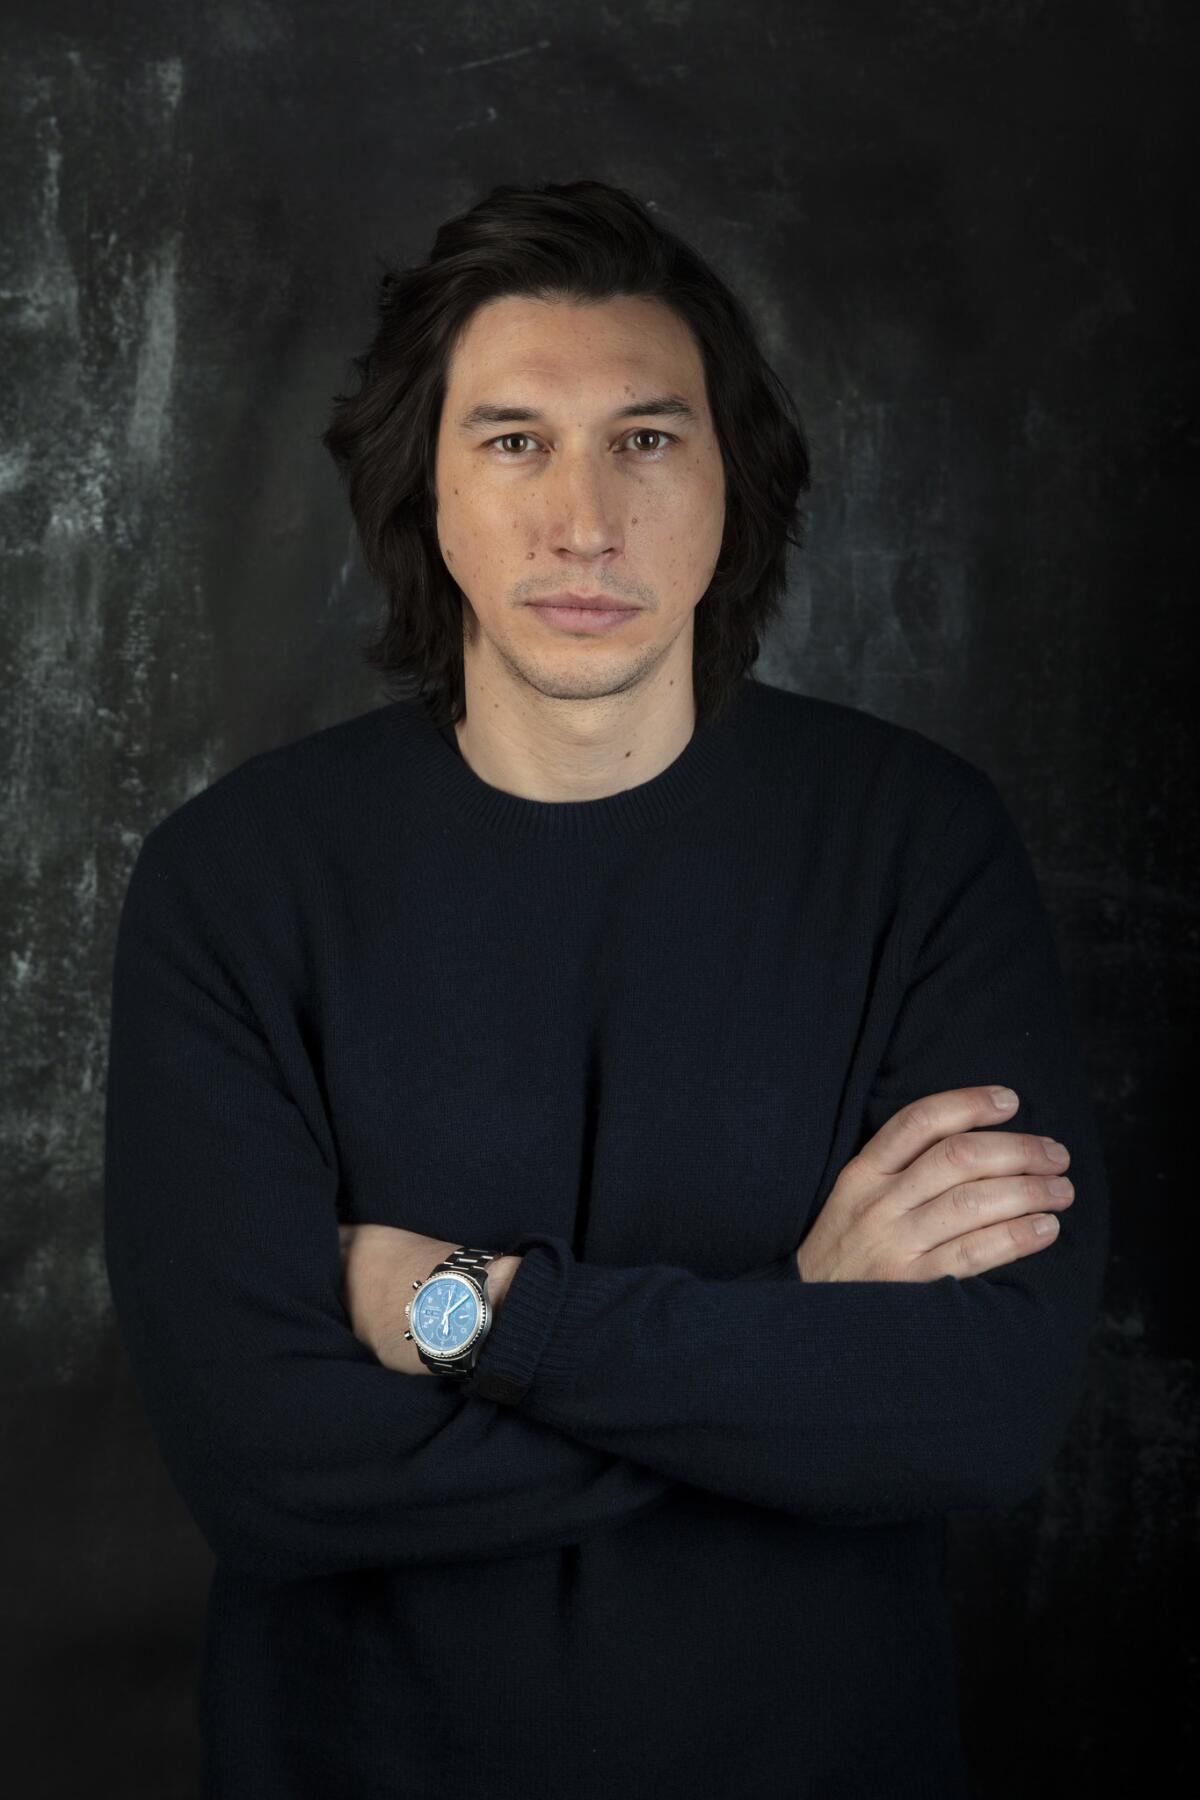 Adam Driver, photographed at Sundance 2019, where his film "The Report" premiered.